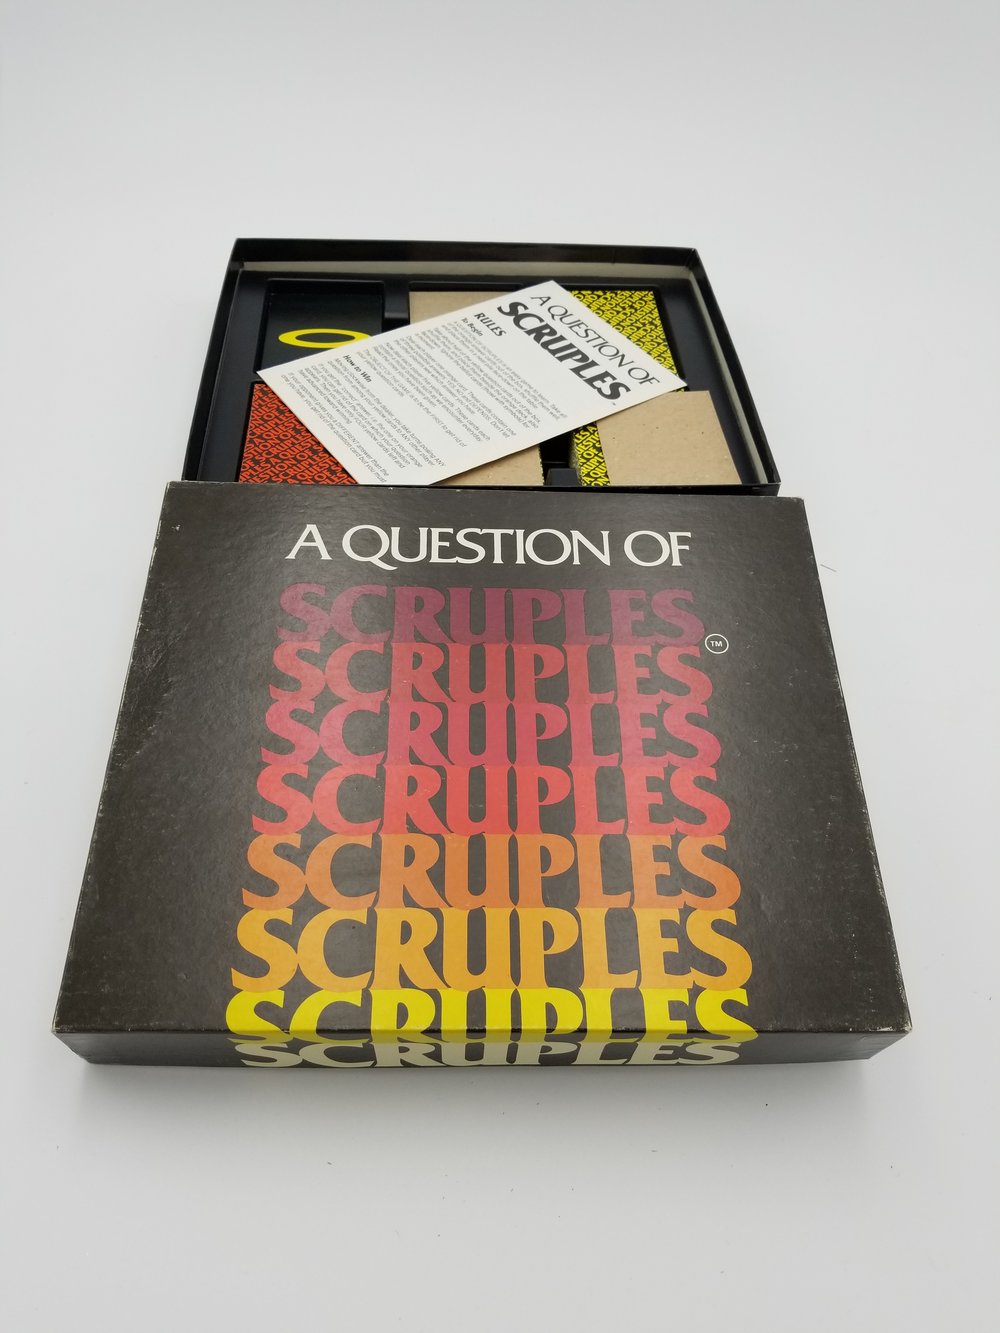 1984 A Question of Scruples The Game of Moral Dilemmas 